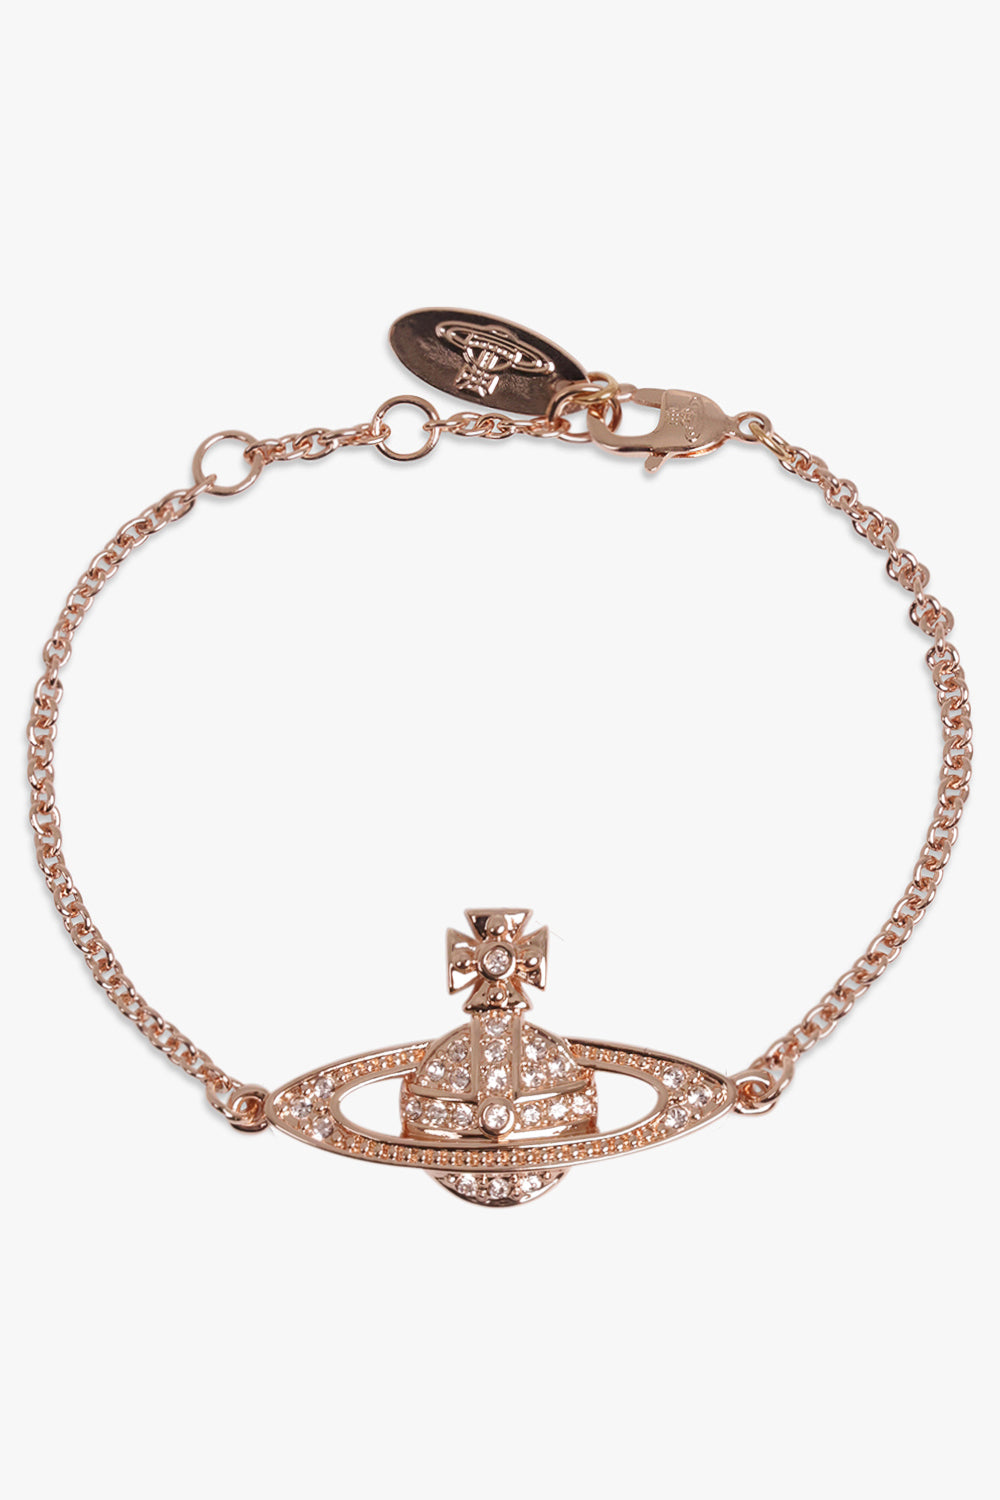 VIVIENNE WESTWOOD JEWELLRY PINK / PINK MINI BAS RELIEF CHAIN BRACELET | ROSE GOLD